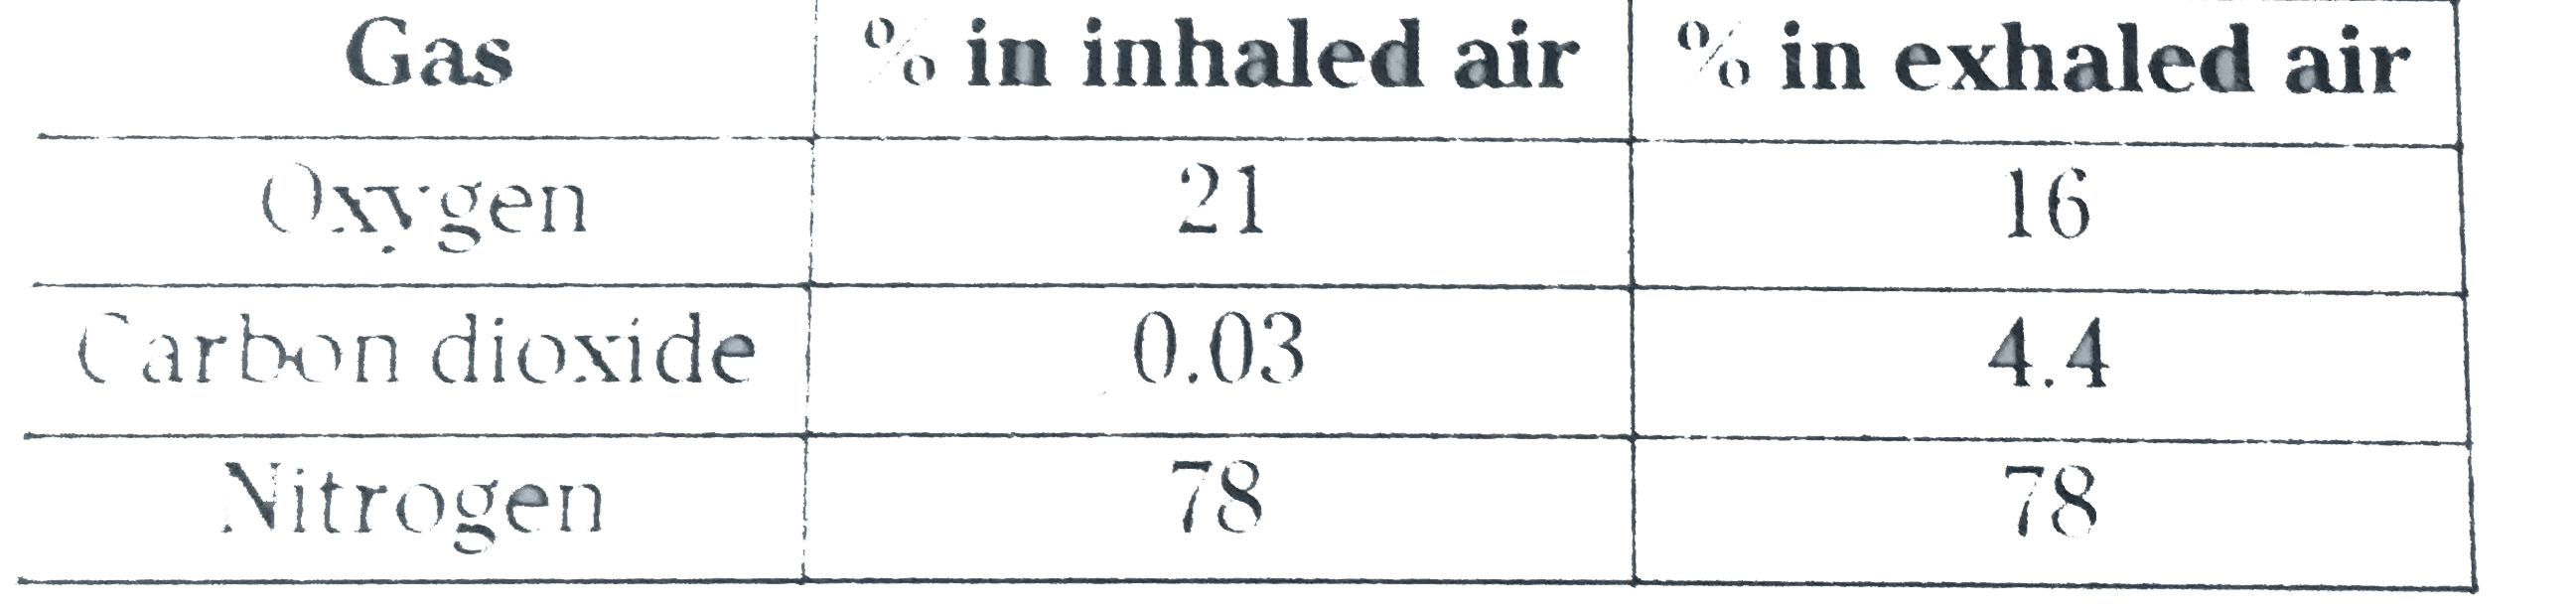 Observe following table and answer the questions given below .       Why does the amount of oxygen vary between exhaled and inhaled air ?